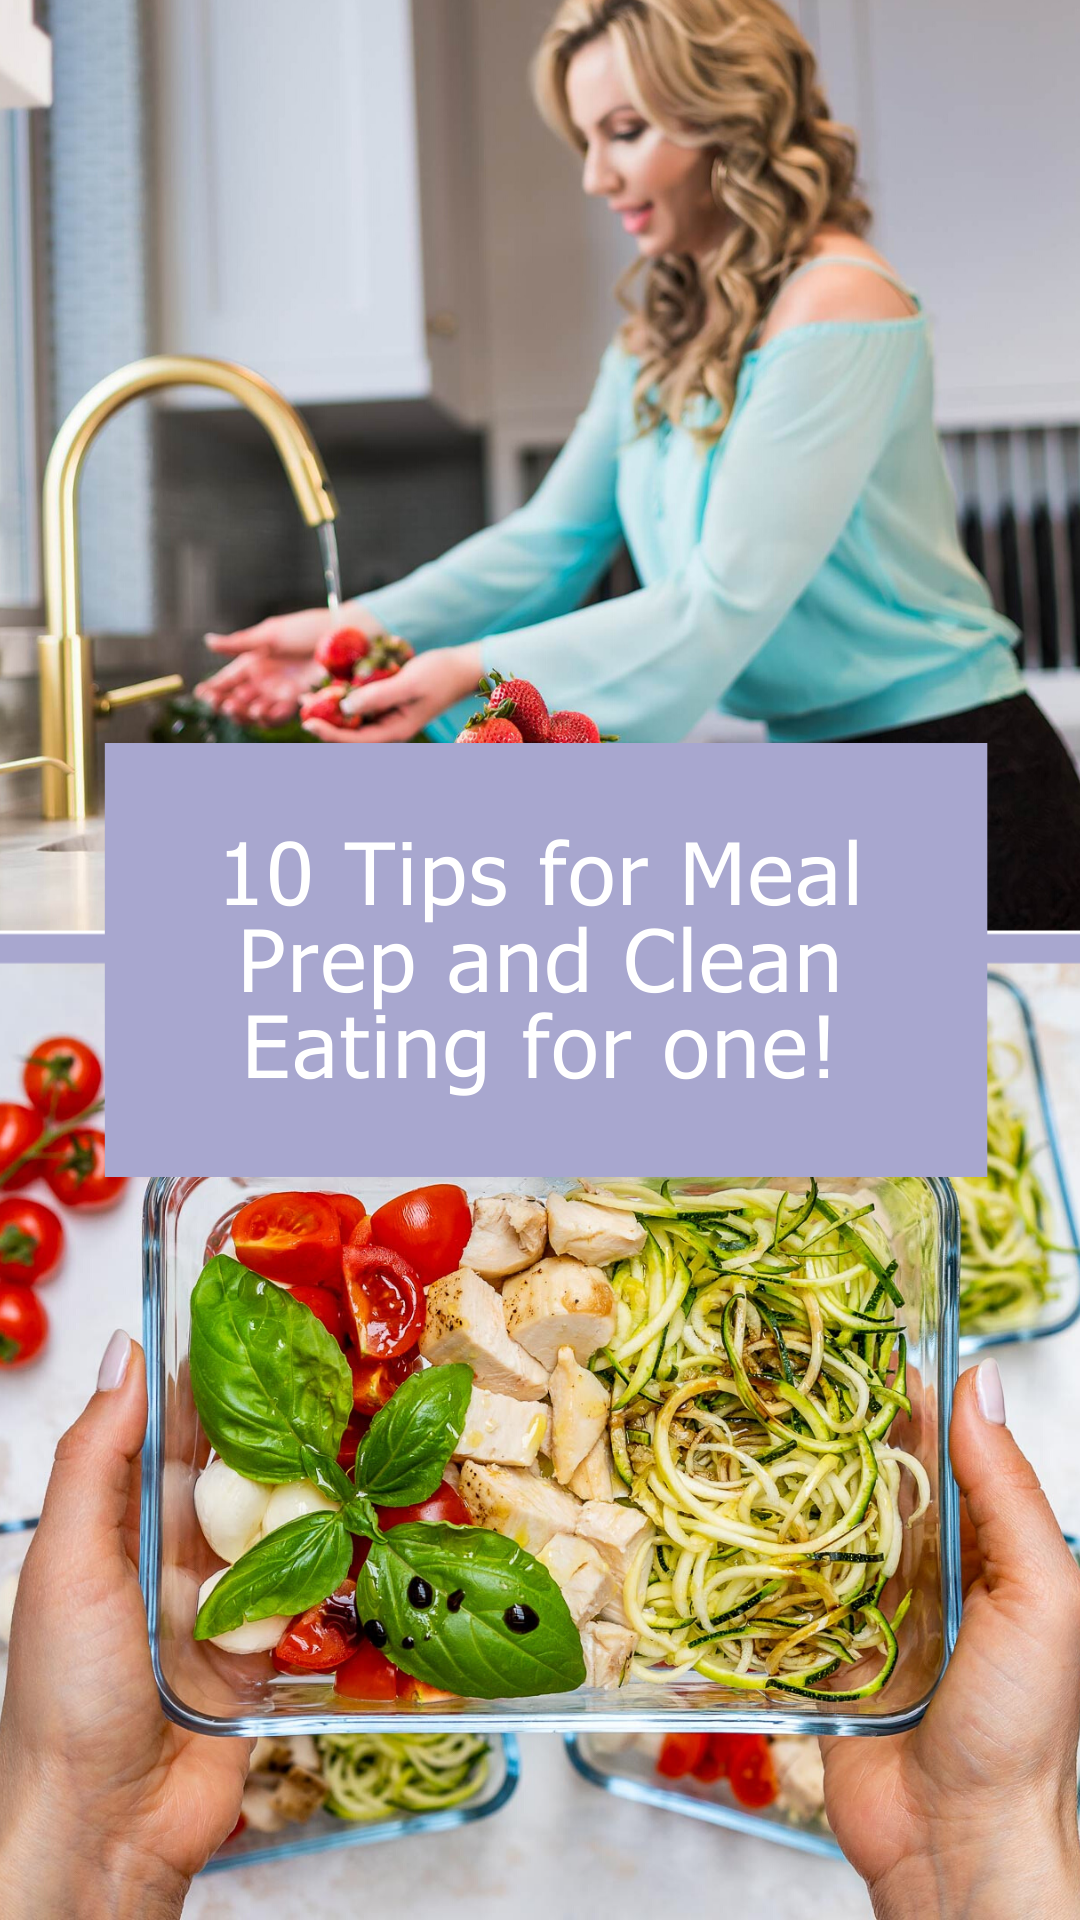 https://cleanfoodcrush.com/wp-content/uploads/2020/07/10-tips-for-meal-prep-for-one-cleanfoodcrush.png